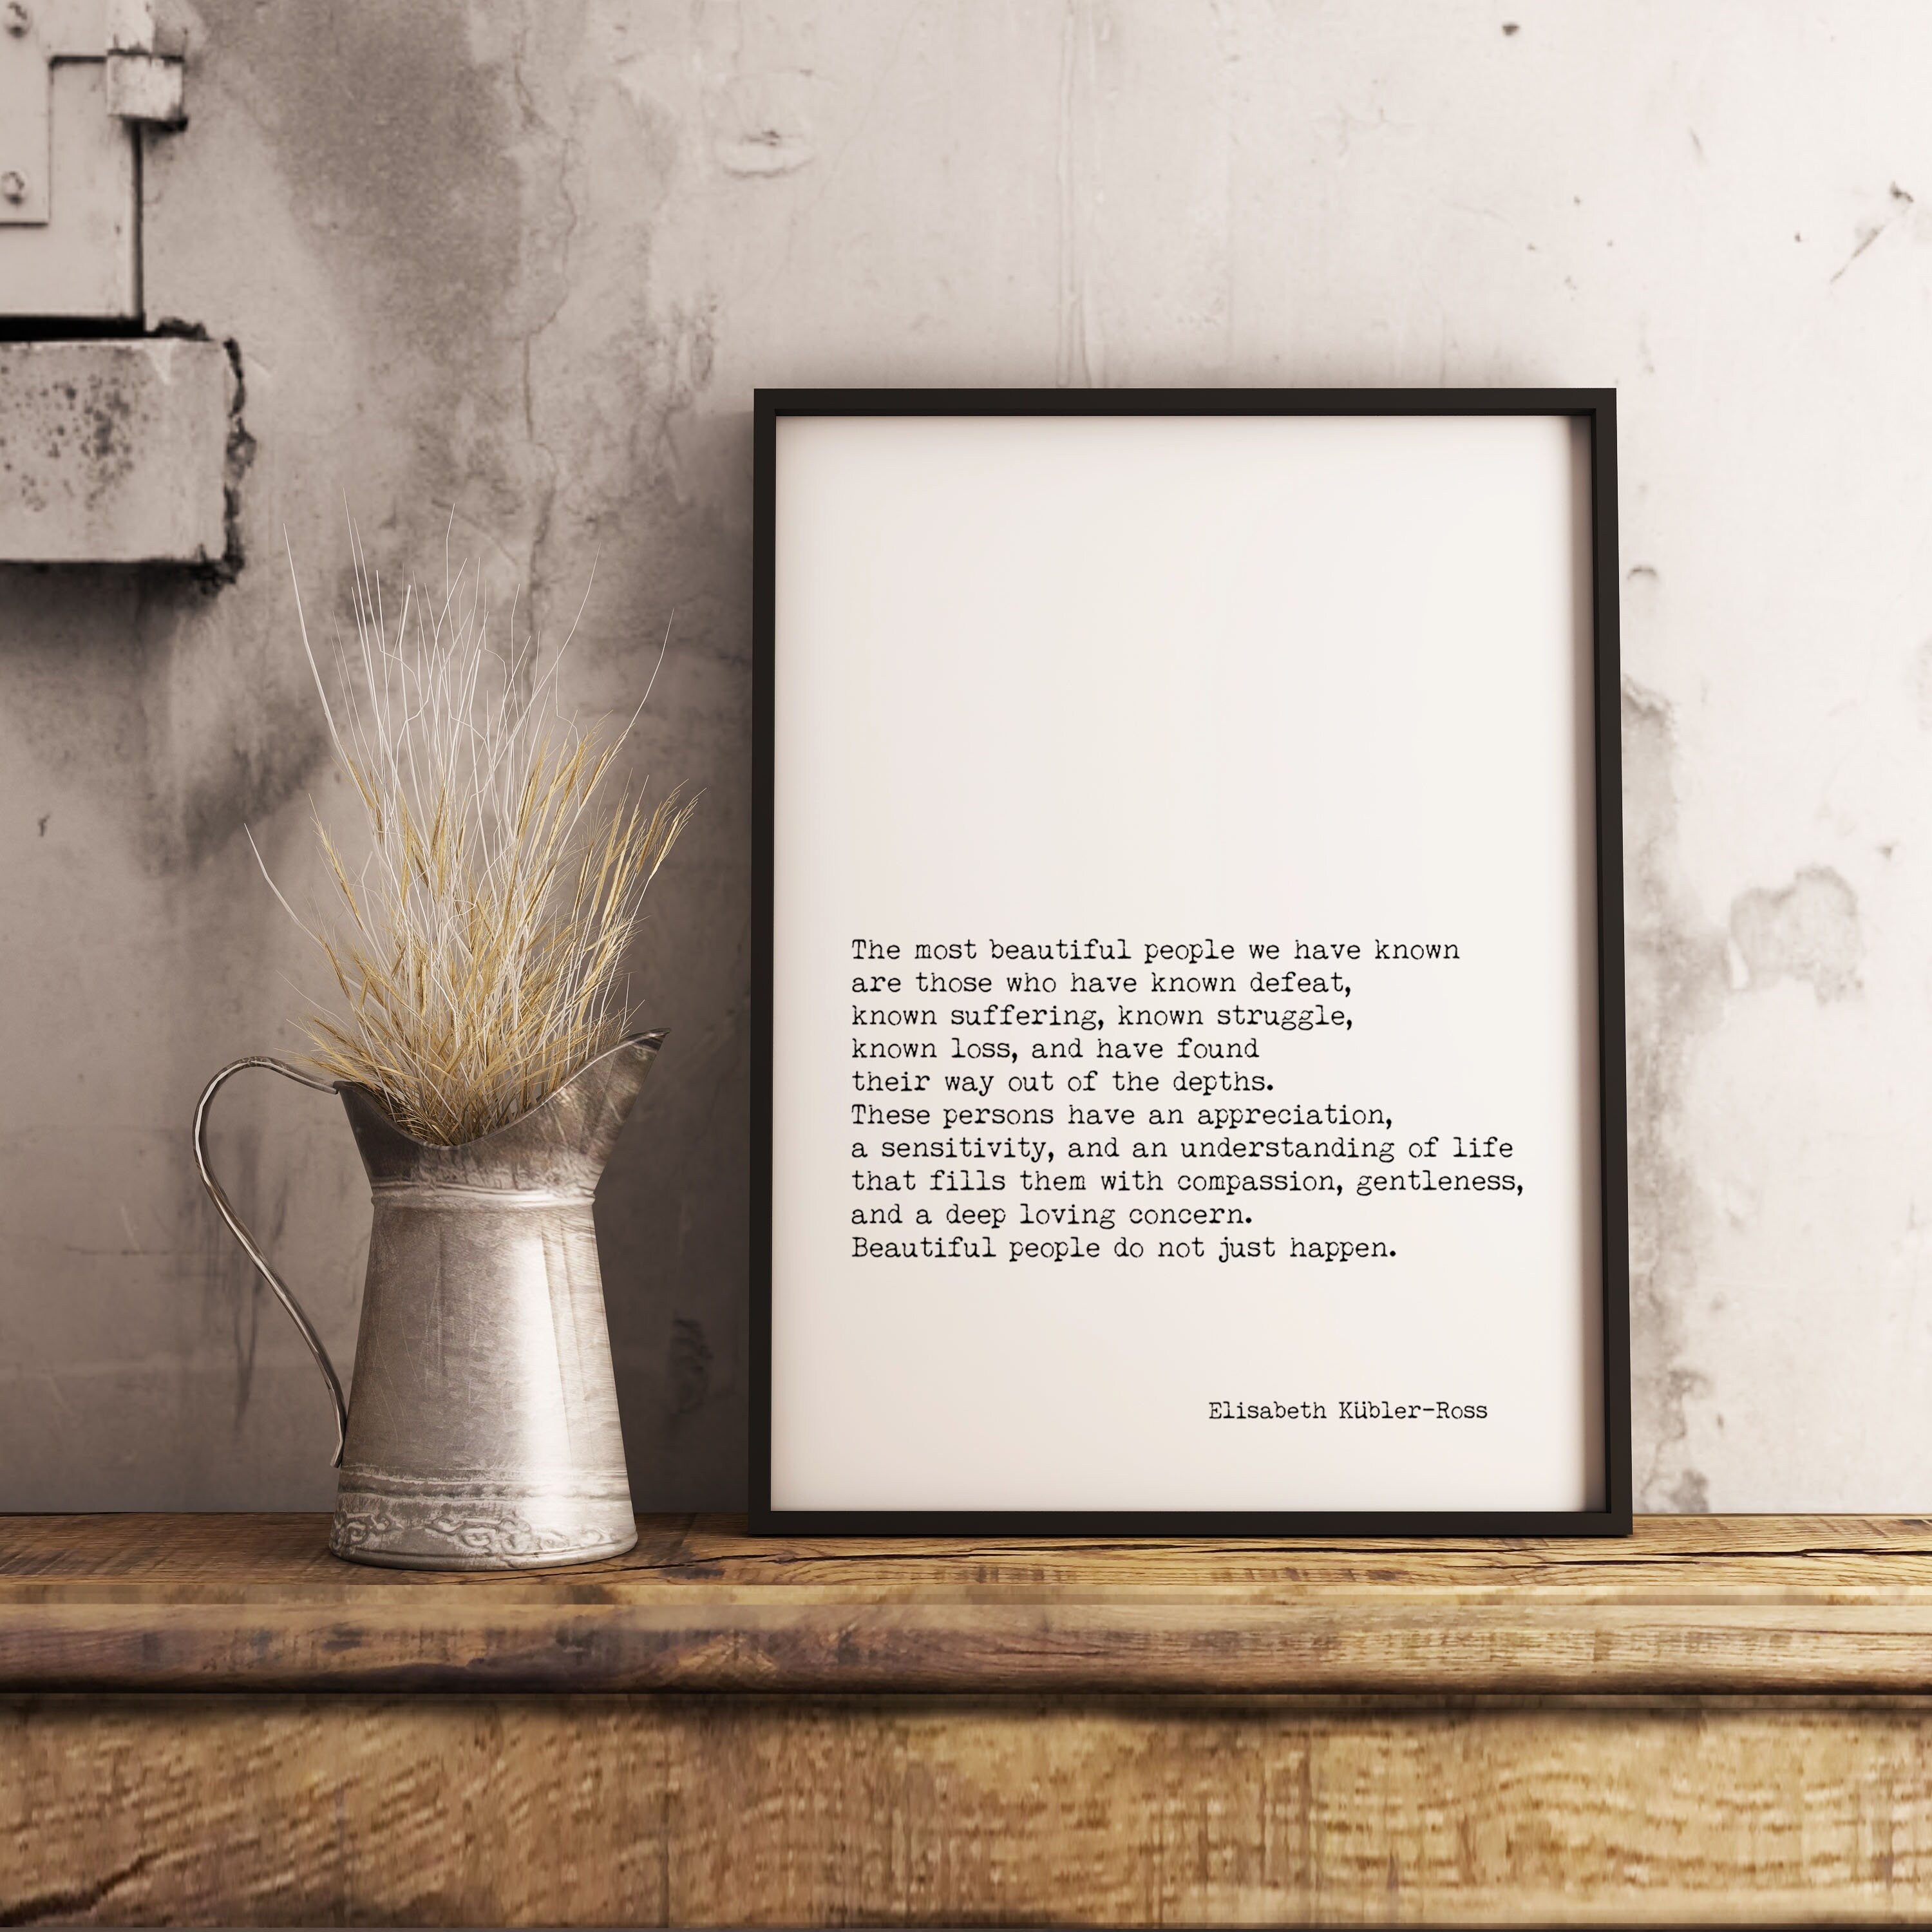 LARGE Framed Elisabeth Kubler-Ross Quote Print, The Most Beautiful People Inspirational Art in Black & White for Home Wall Decor